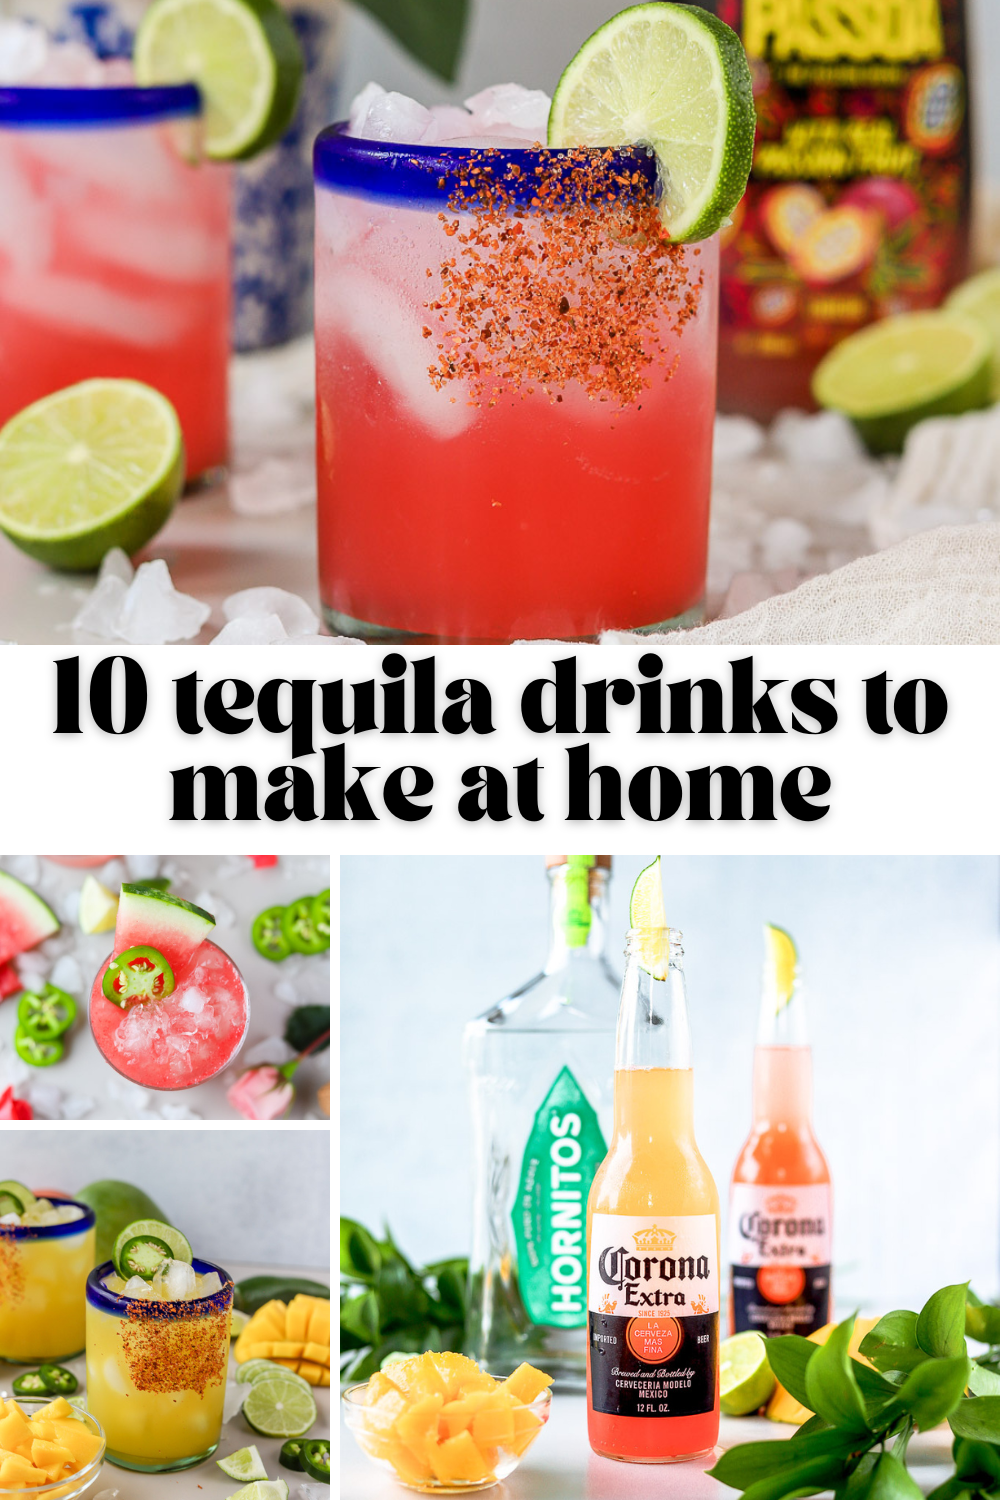 I love making myself a delicious tequila cocktail, here are 10 of my favorite tequila drinks to make at home. They're so easy, you'll love them all! 